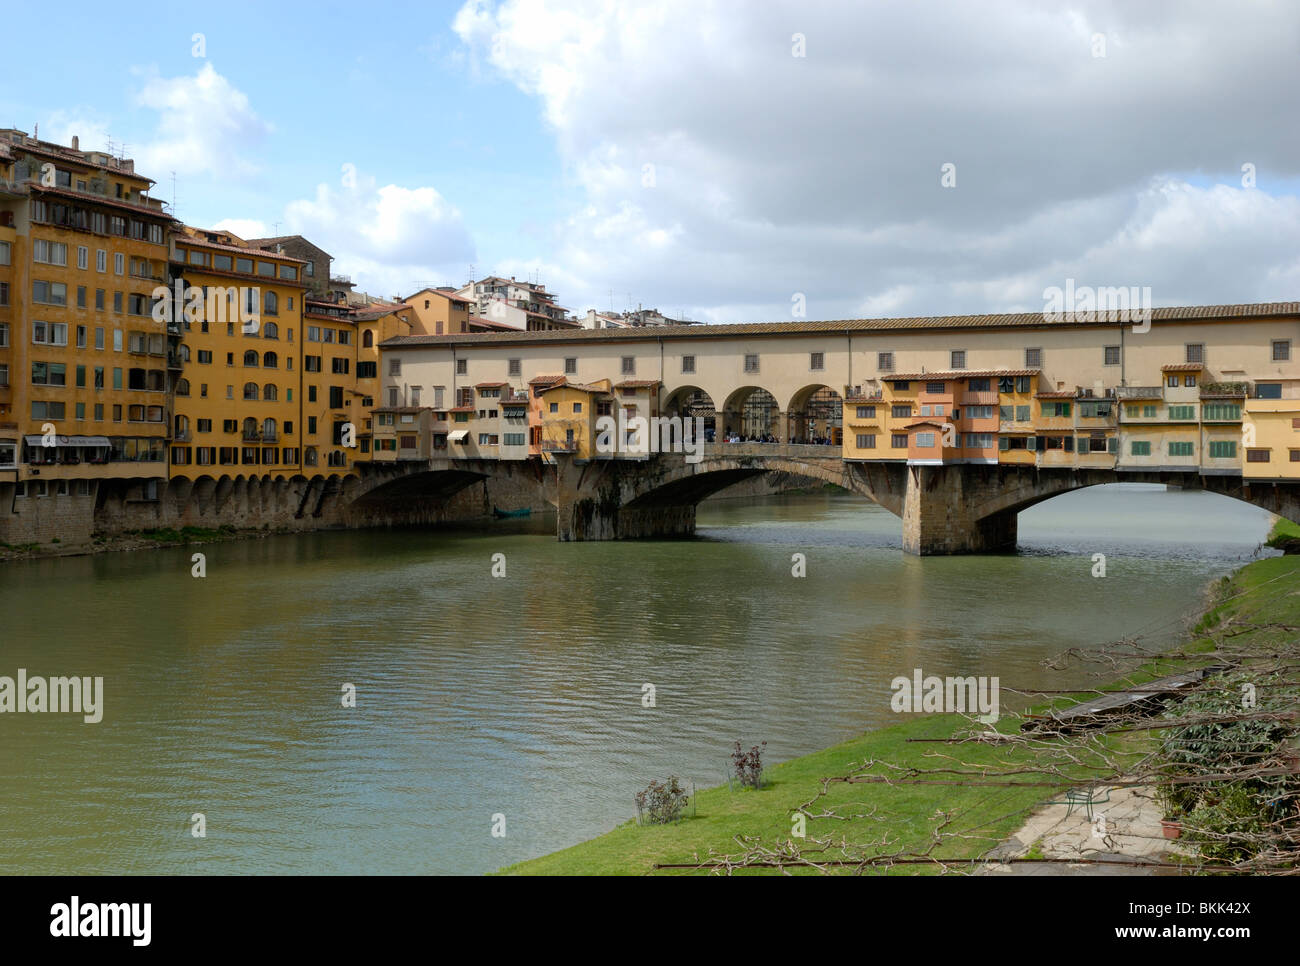 The Ponte Vecchio, the Old Bridge, is the only bridge that survive World War ll in Florence and nowadays the three arched ...... Stock Photo